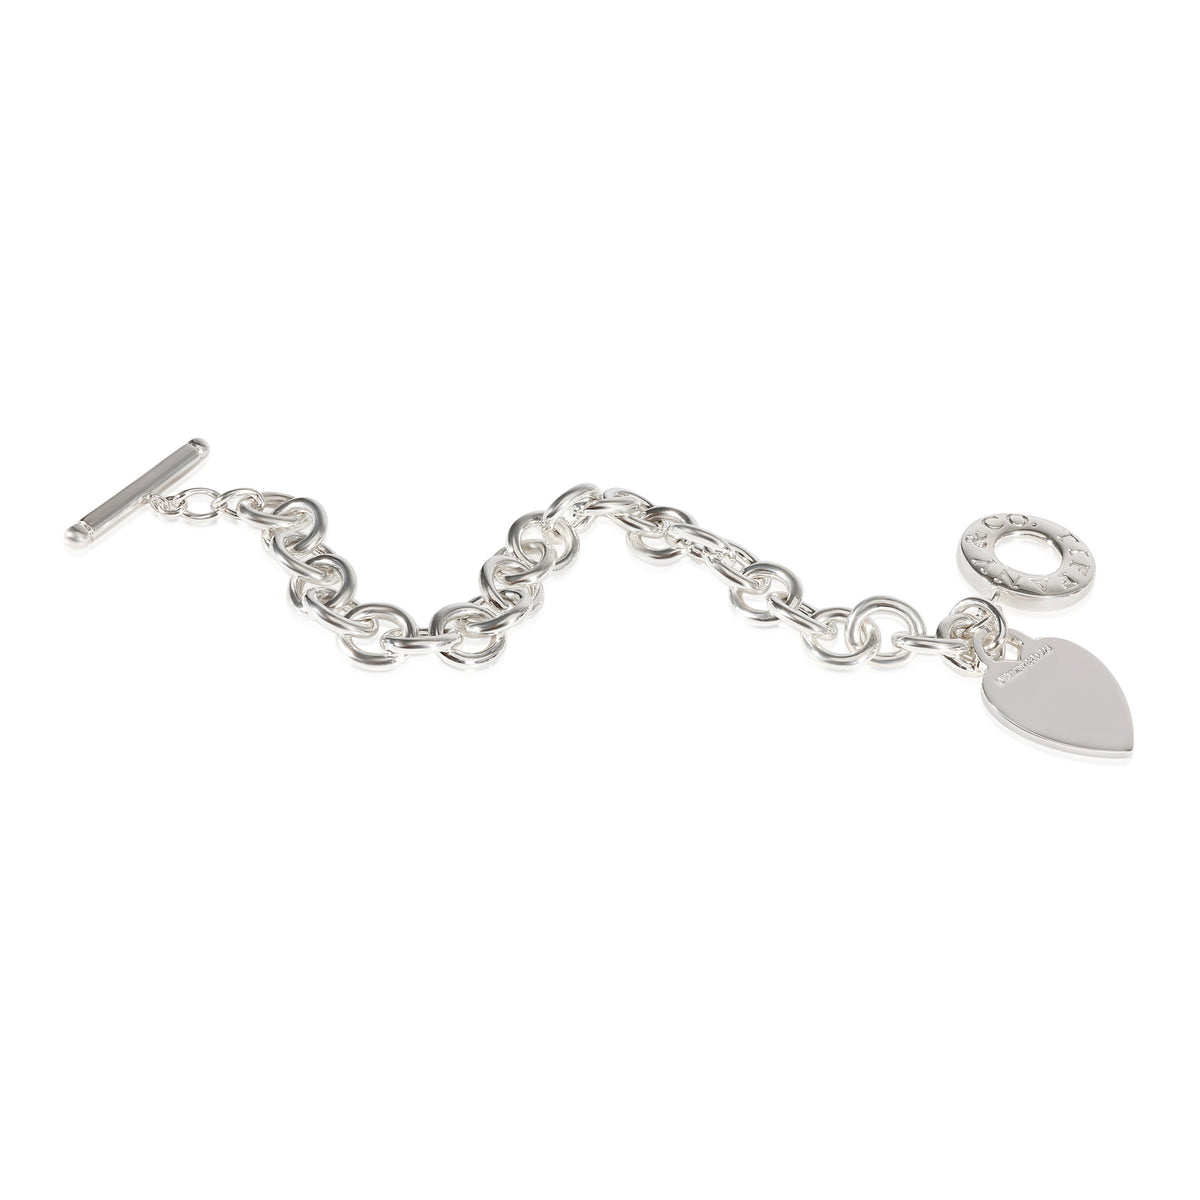 Tiffany & Co Silver Toggle Bracelet Bangle Charm Chain for Charms Gift Love